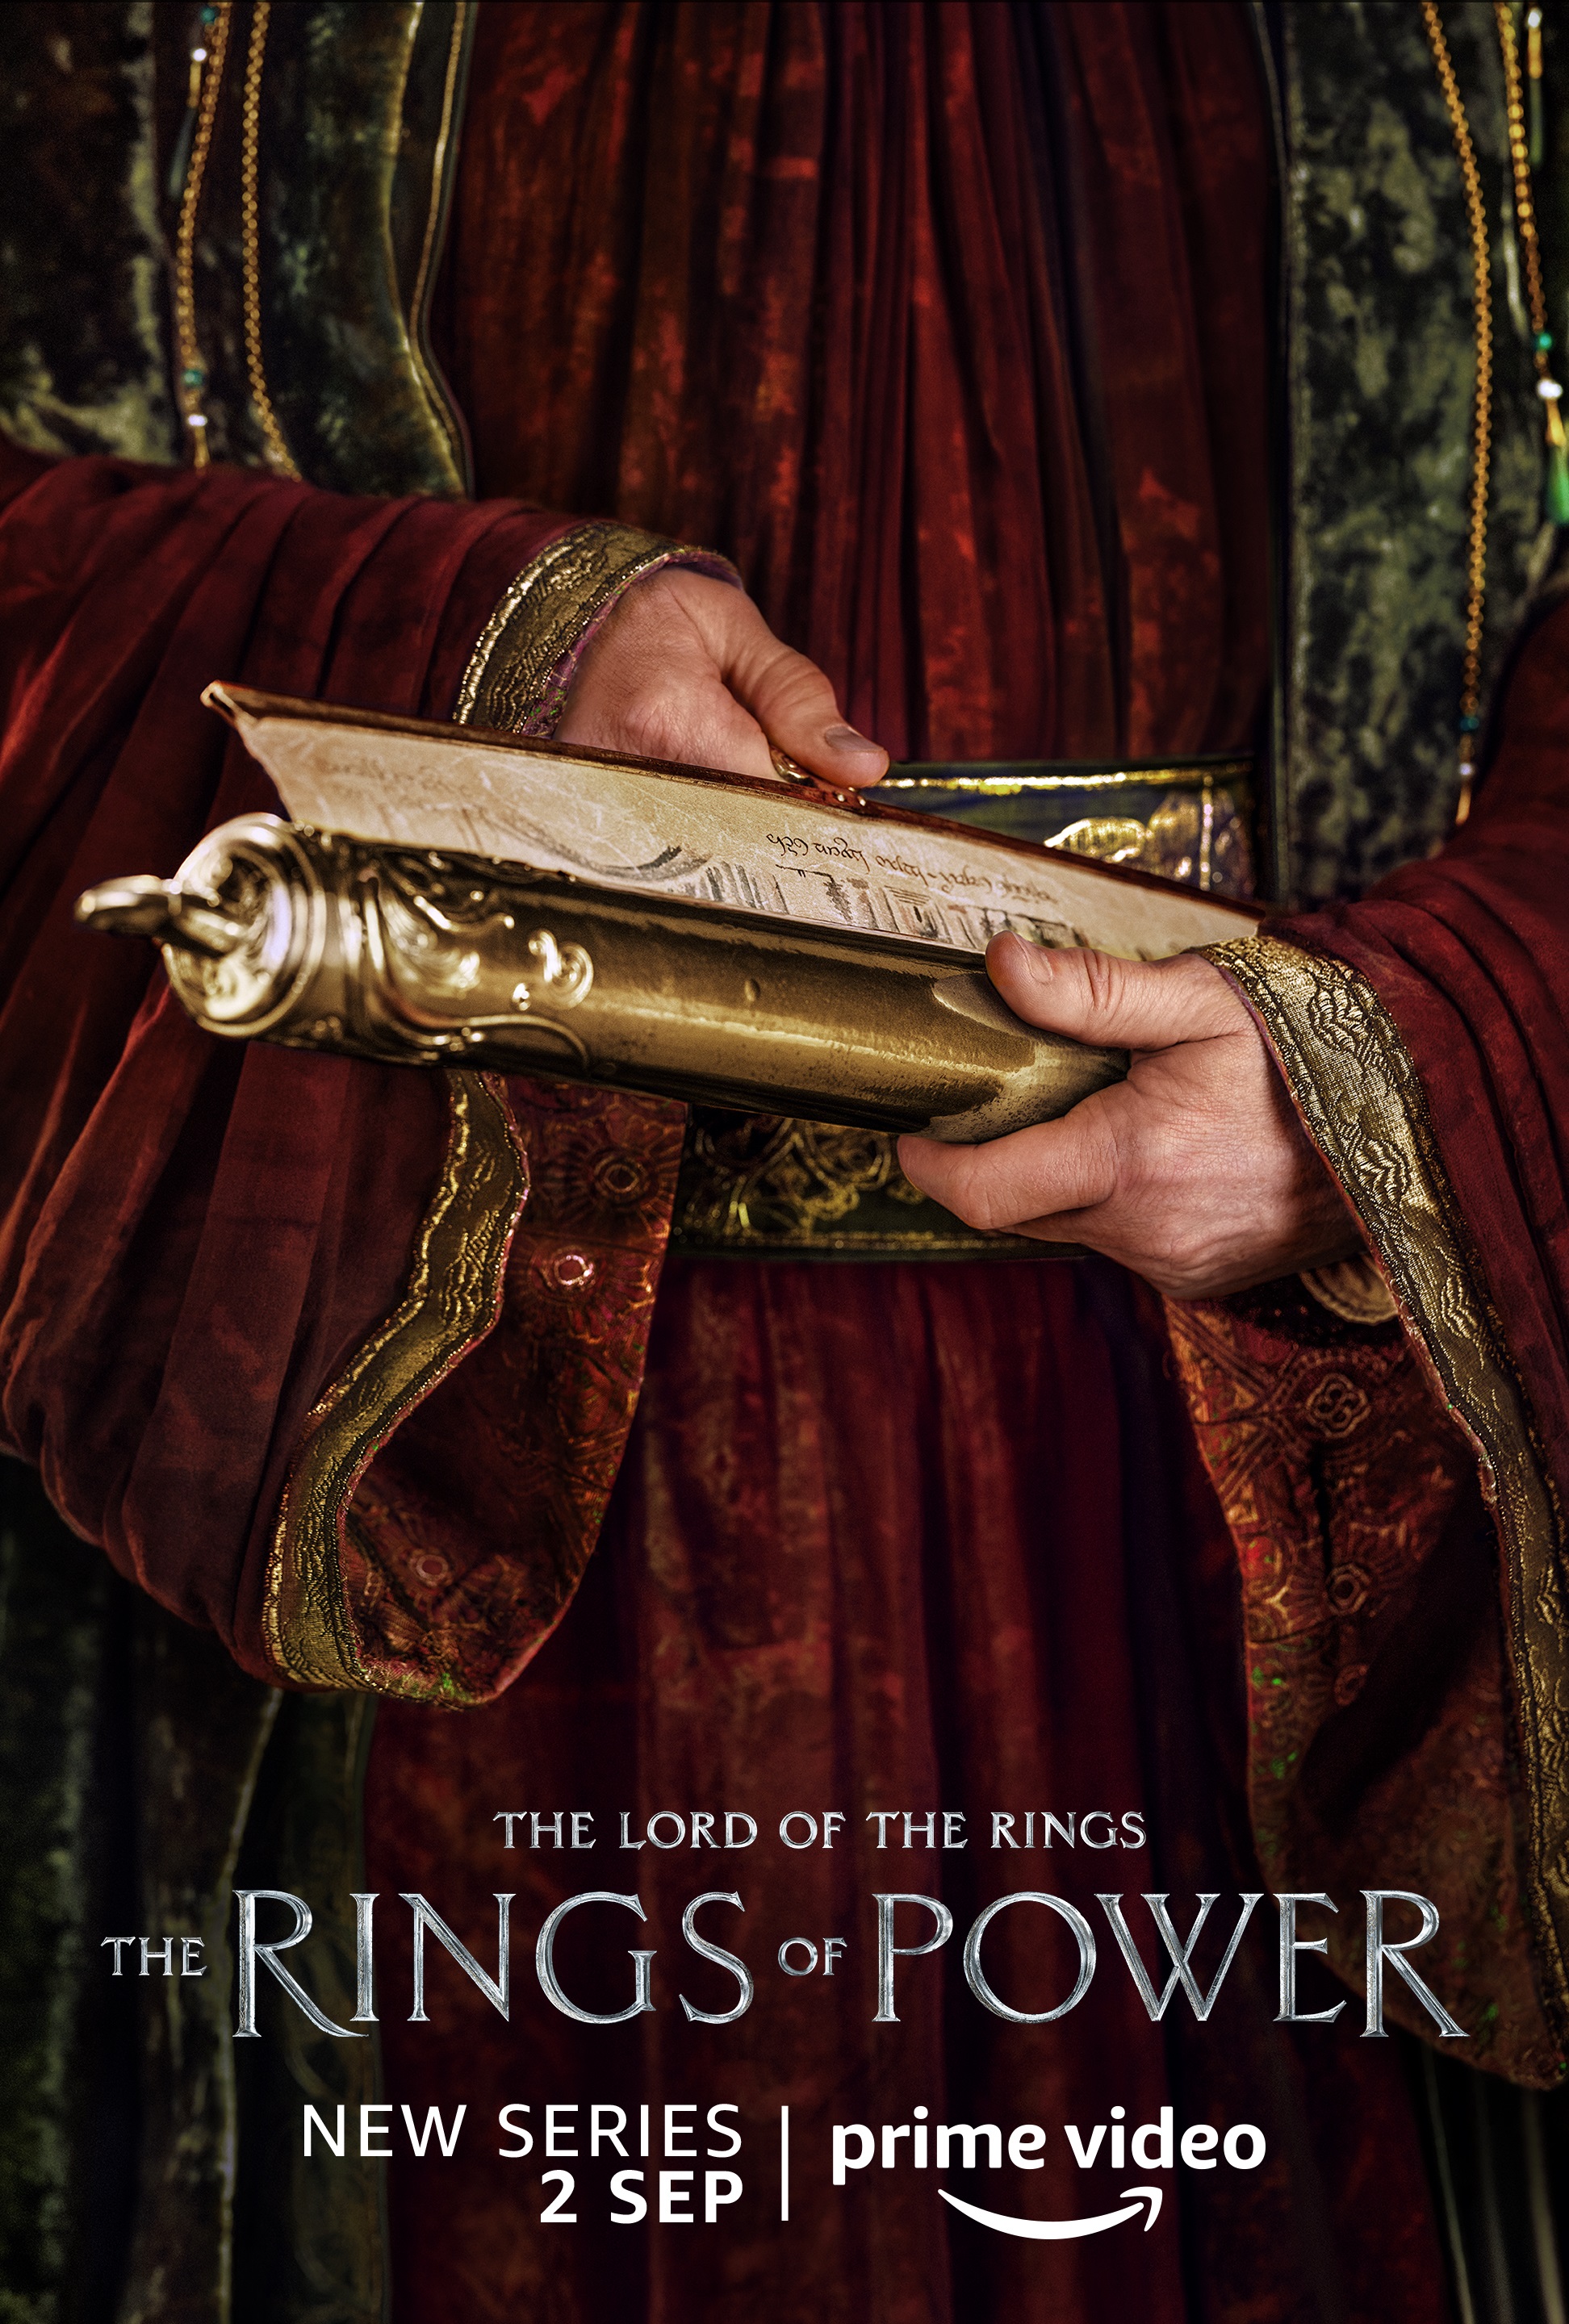 A human scholar character poster for Lord of the Rings: The Rings of Power